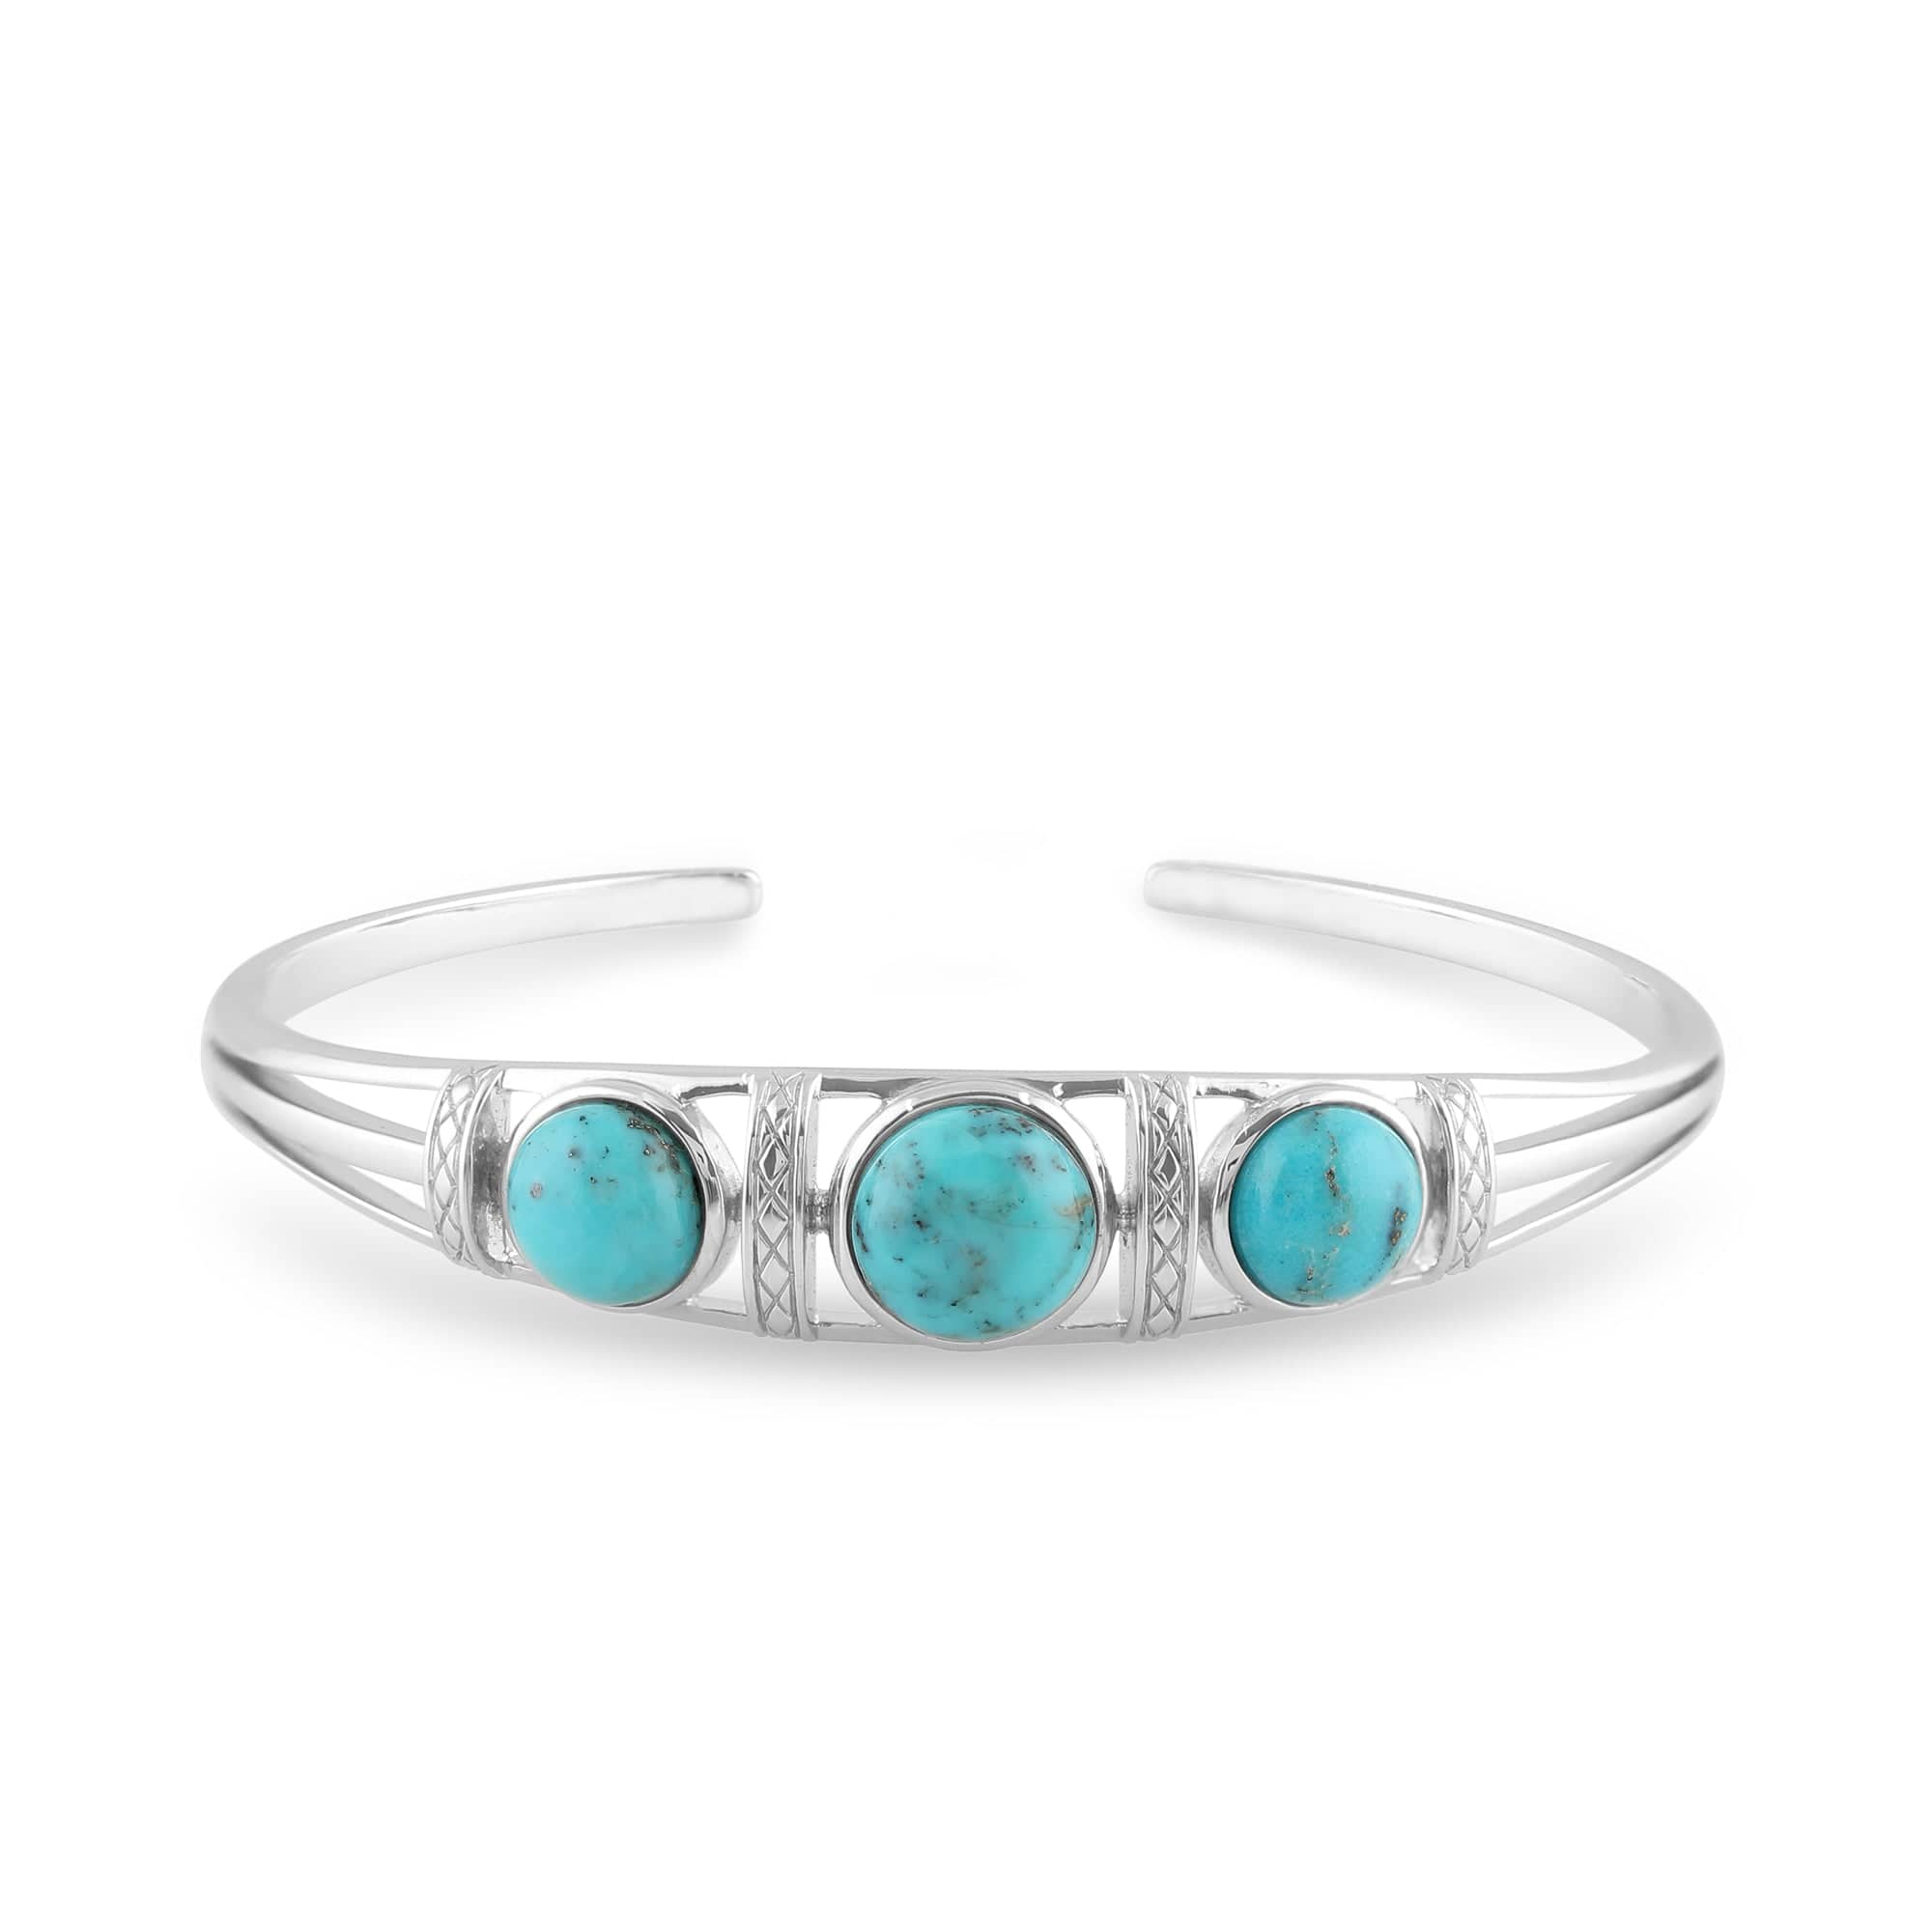 Boho Round Turquoise Cabochon Bangle in 925 Sterling Silver - Gemondo